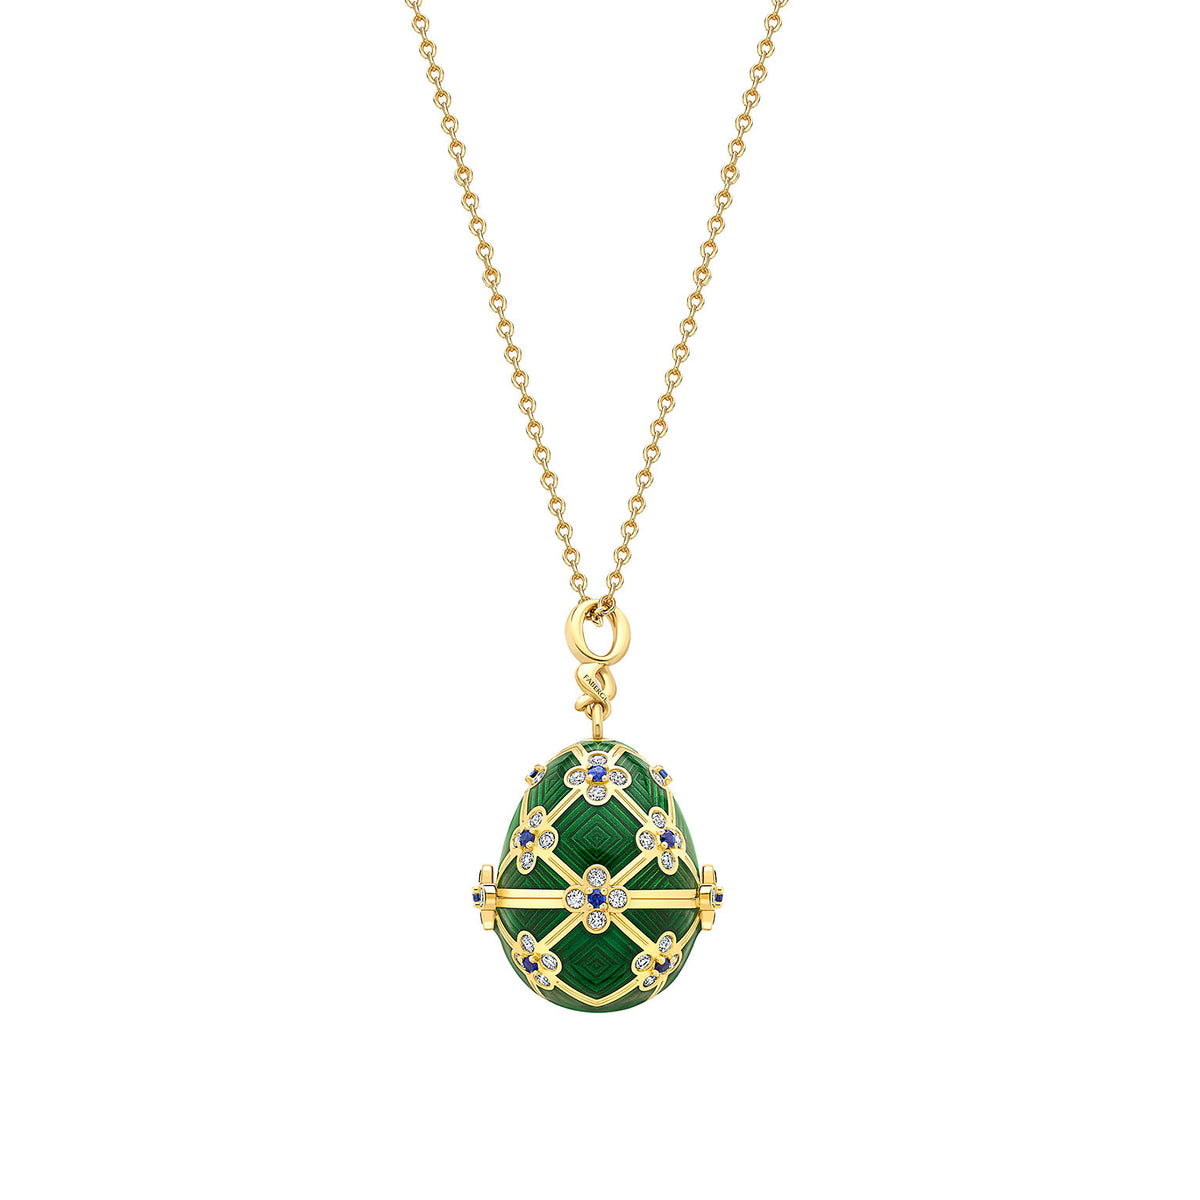 Faberge 18ct Yellow Gold &amp; Green Enamel James Bond Octopussy Egg Locket on Chain